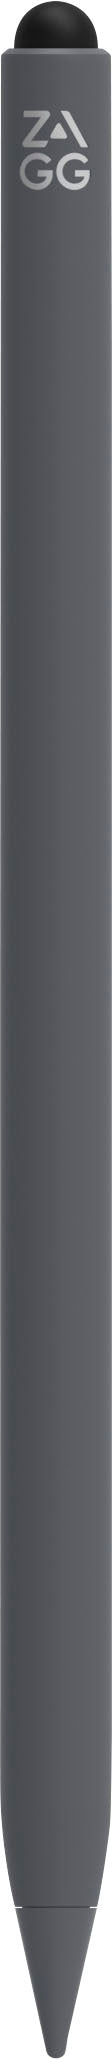 ZAGG - Pro Stylus 2 Active, Dual-Tip Stylus with Wireless Charging - Gray_0